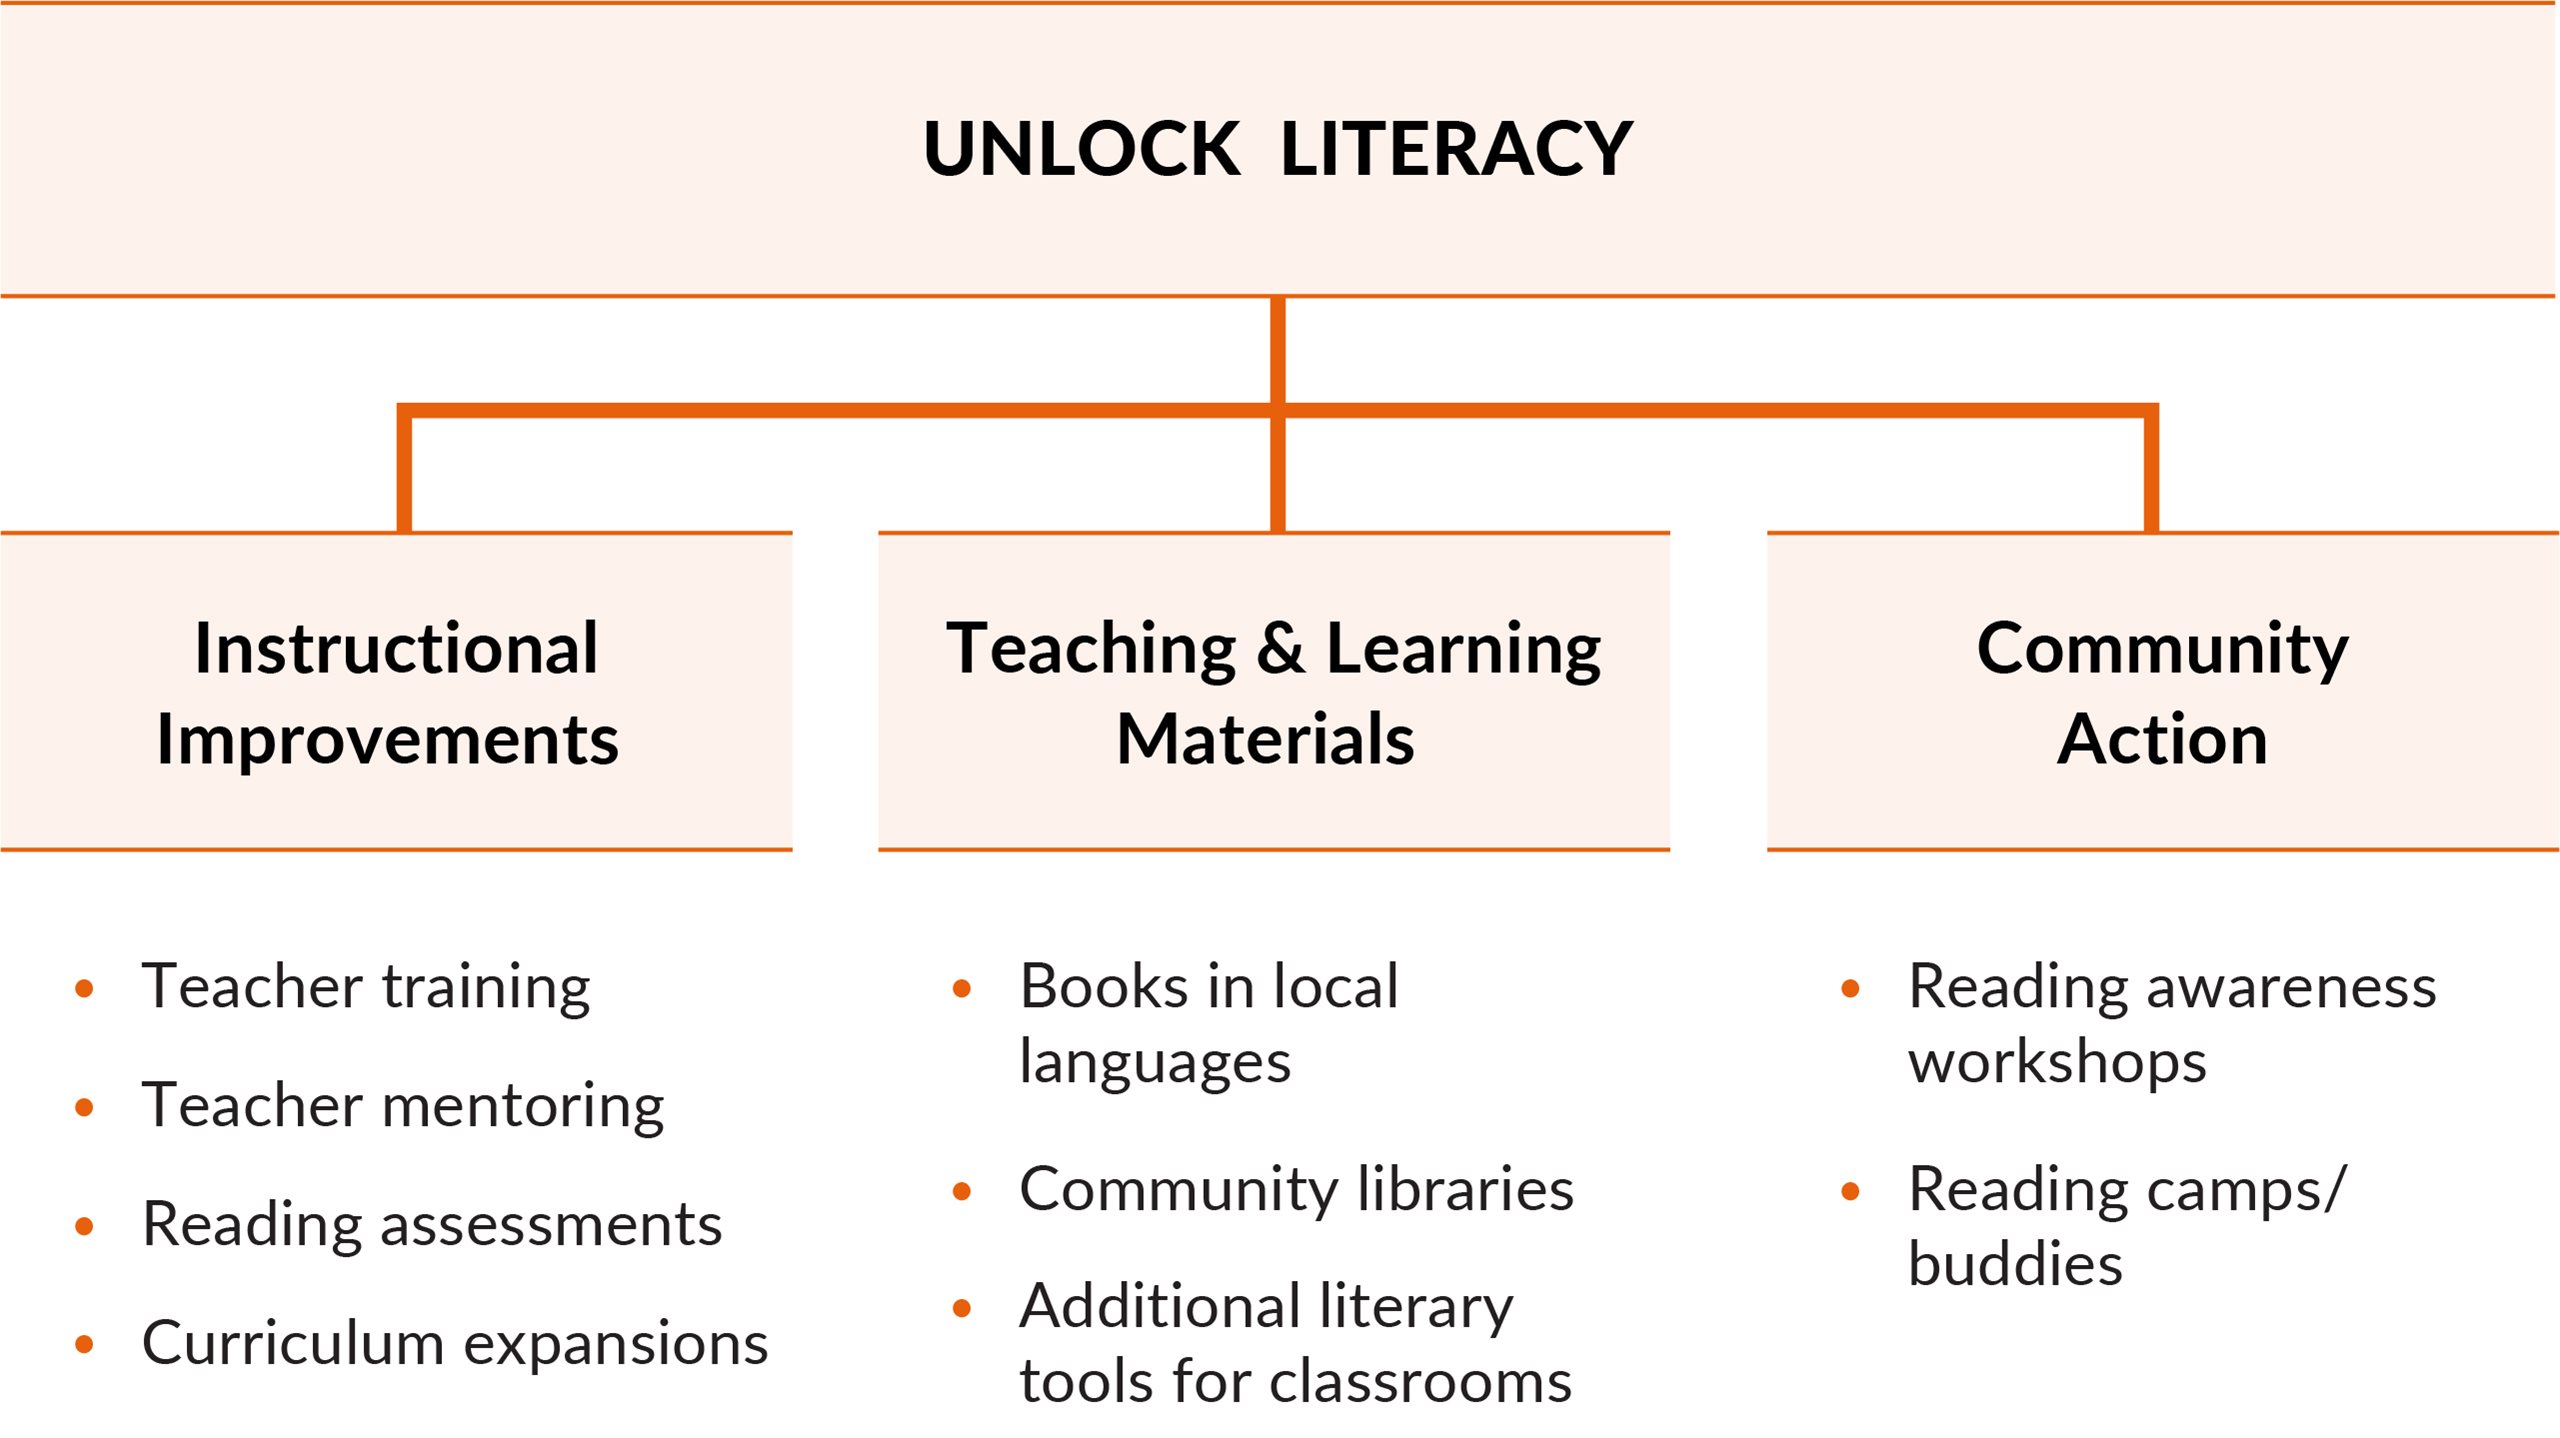 Diagram shows three channels of Unlock Literacy: Instructional Improvements, Teaching and Learning Materials, and Community Action.